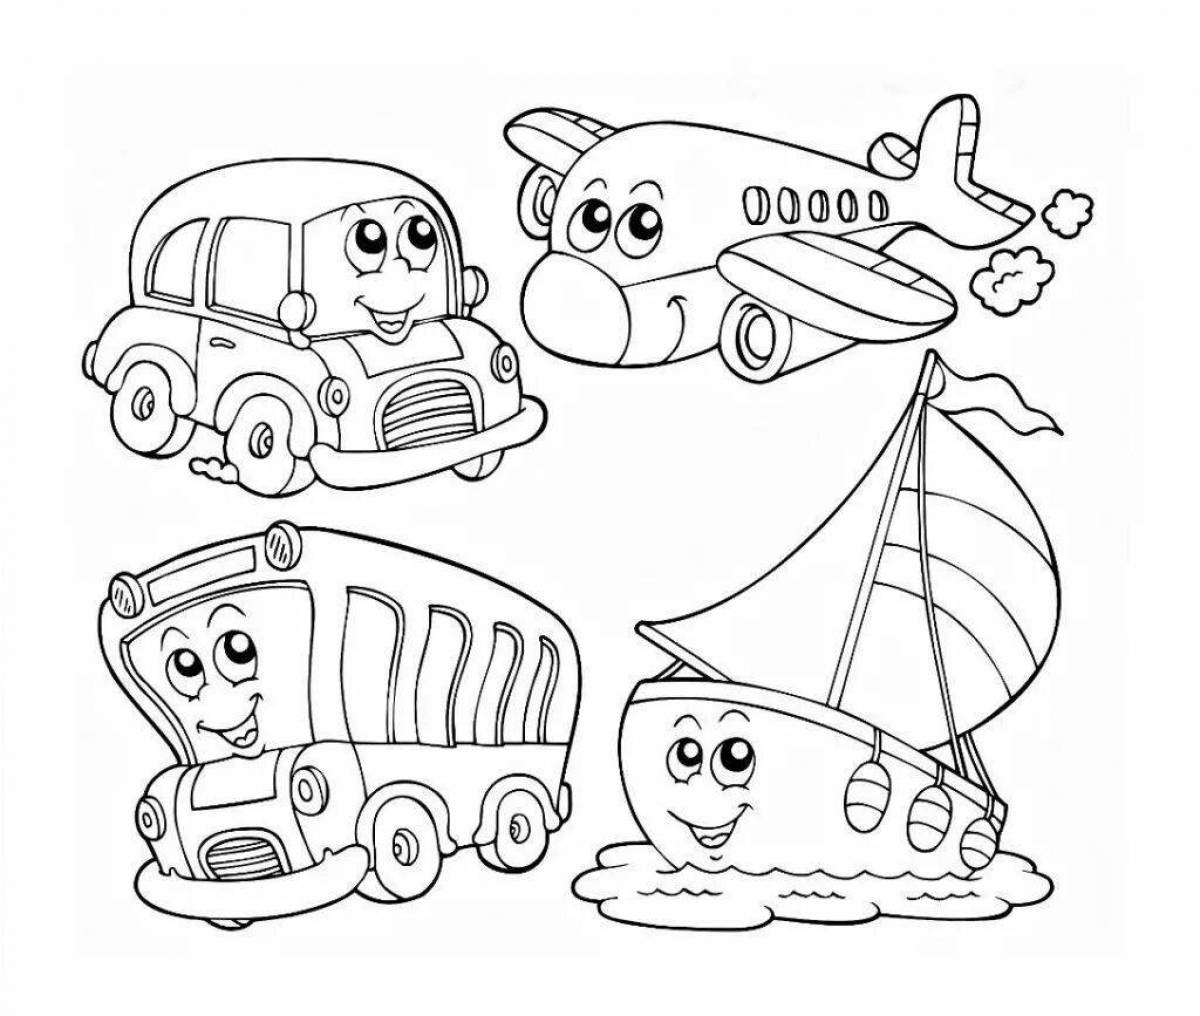 Grand transport coloring for pre-k